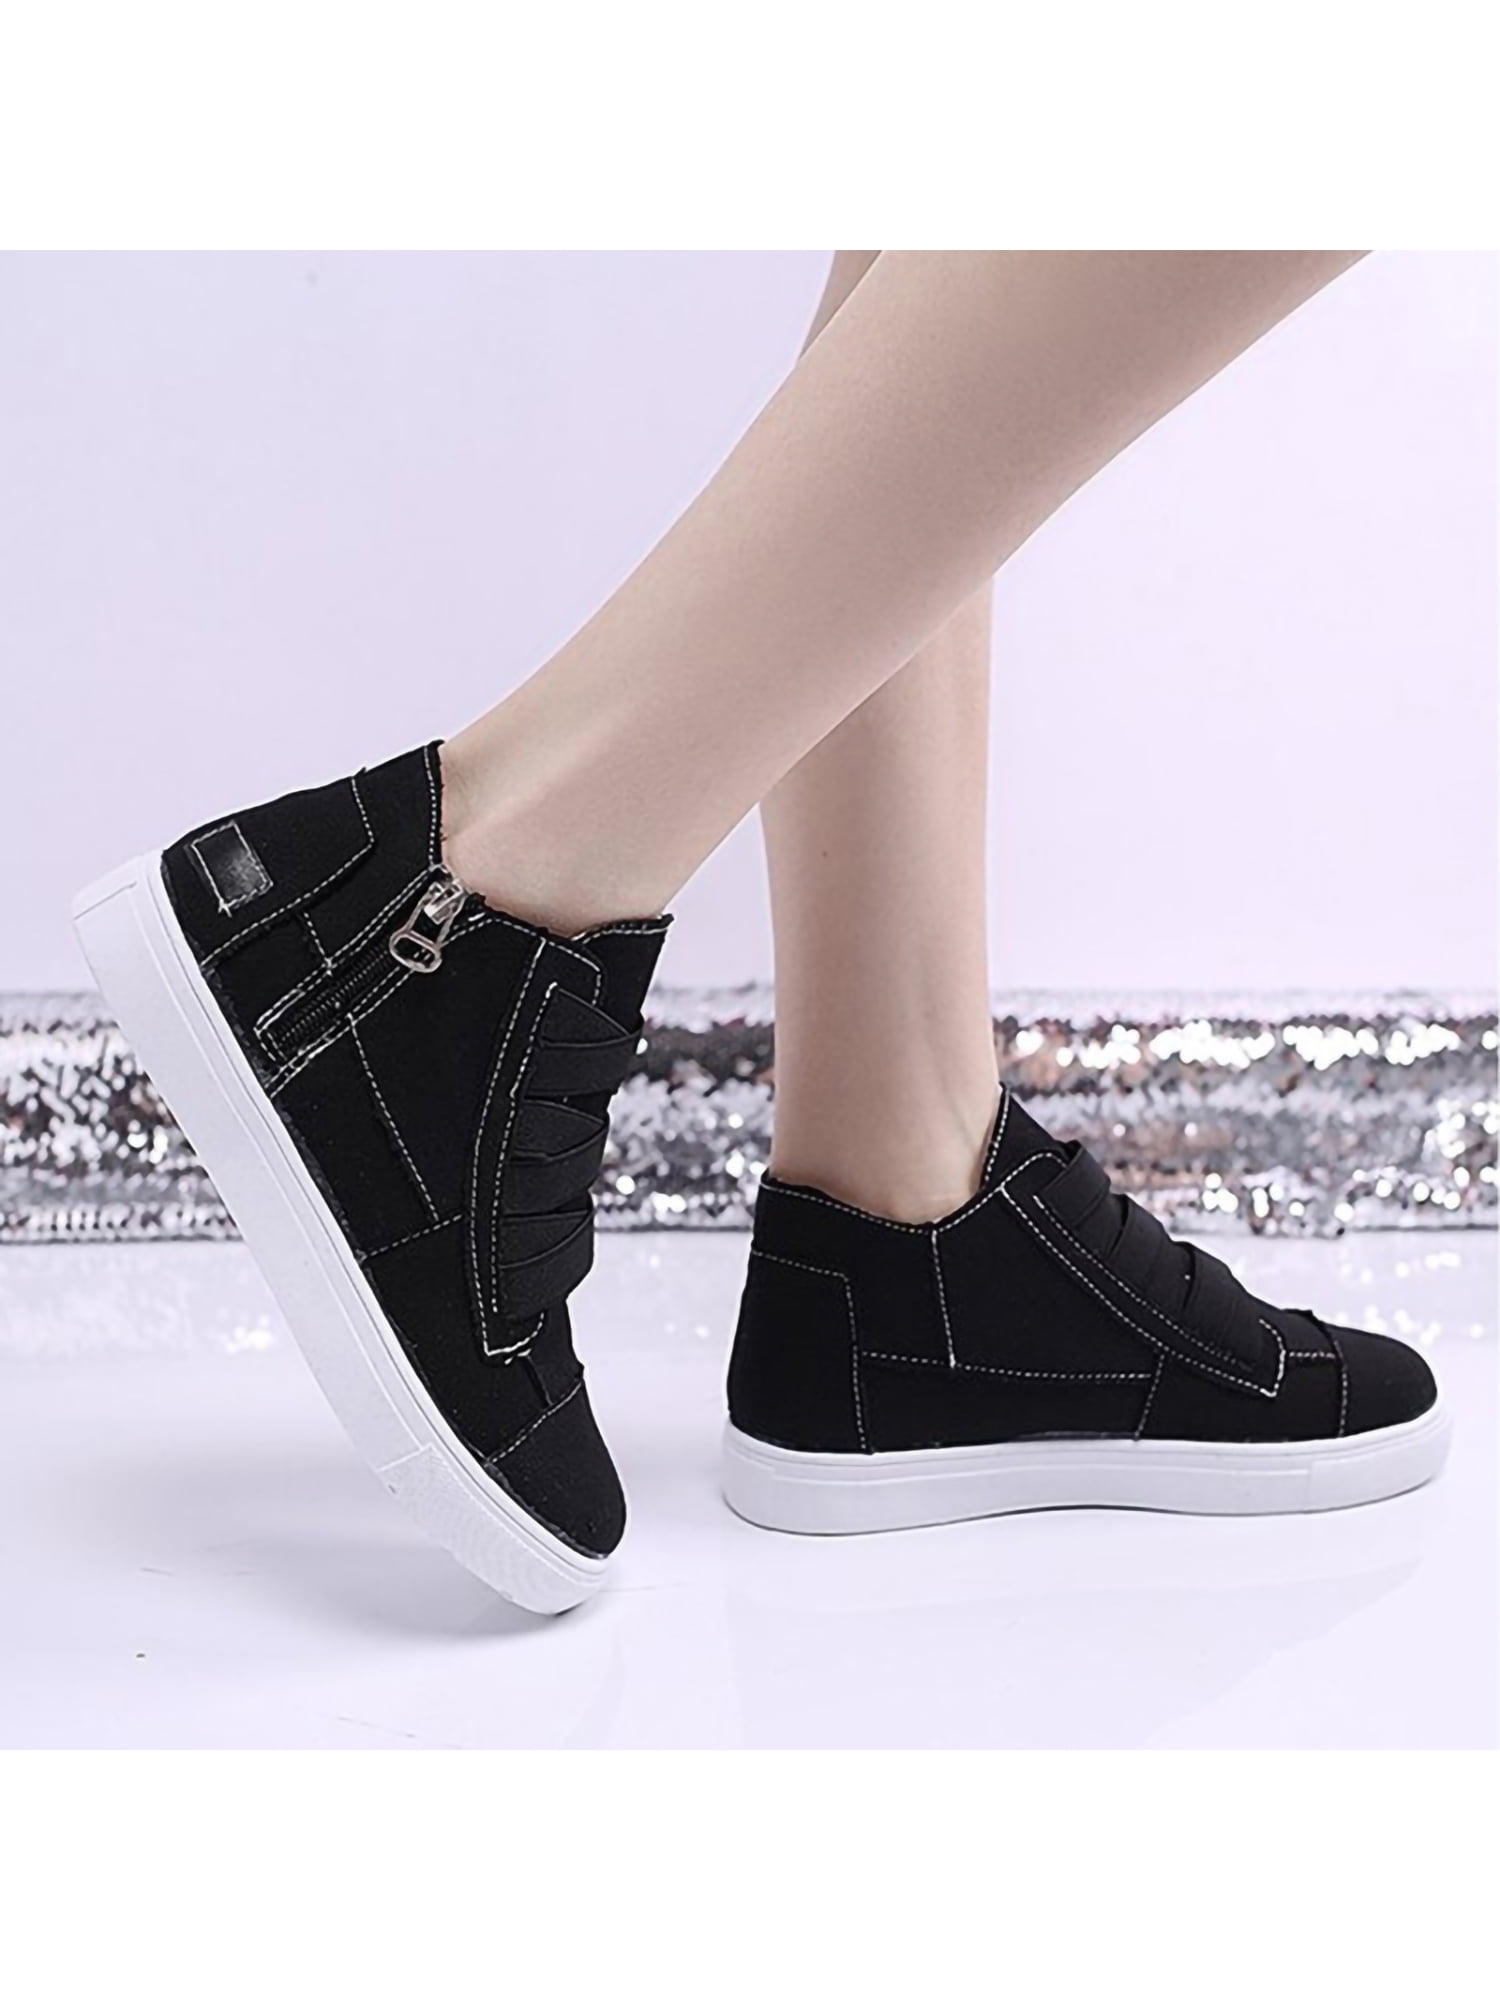 Womens Sneakers Slip On Platform White Canvas Fashion Casual Shoes Low Cut Flats 